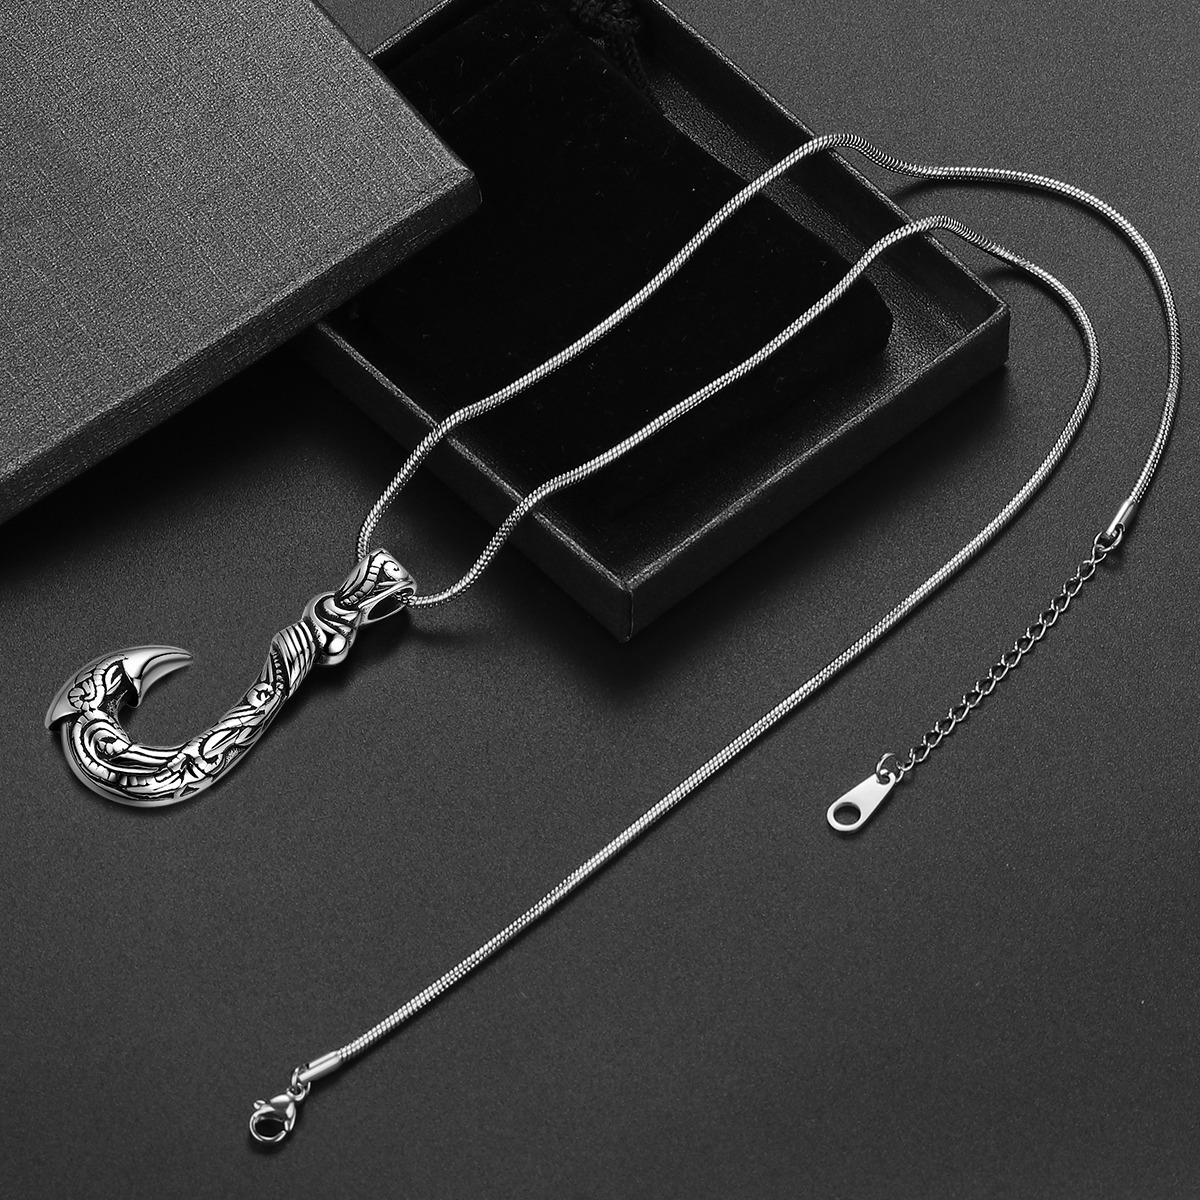 2022 New Men's Fashionable Fish Hook Pendant Stainless Steel